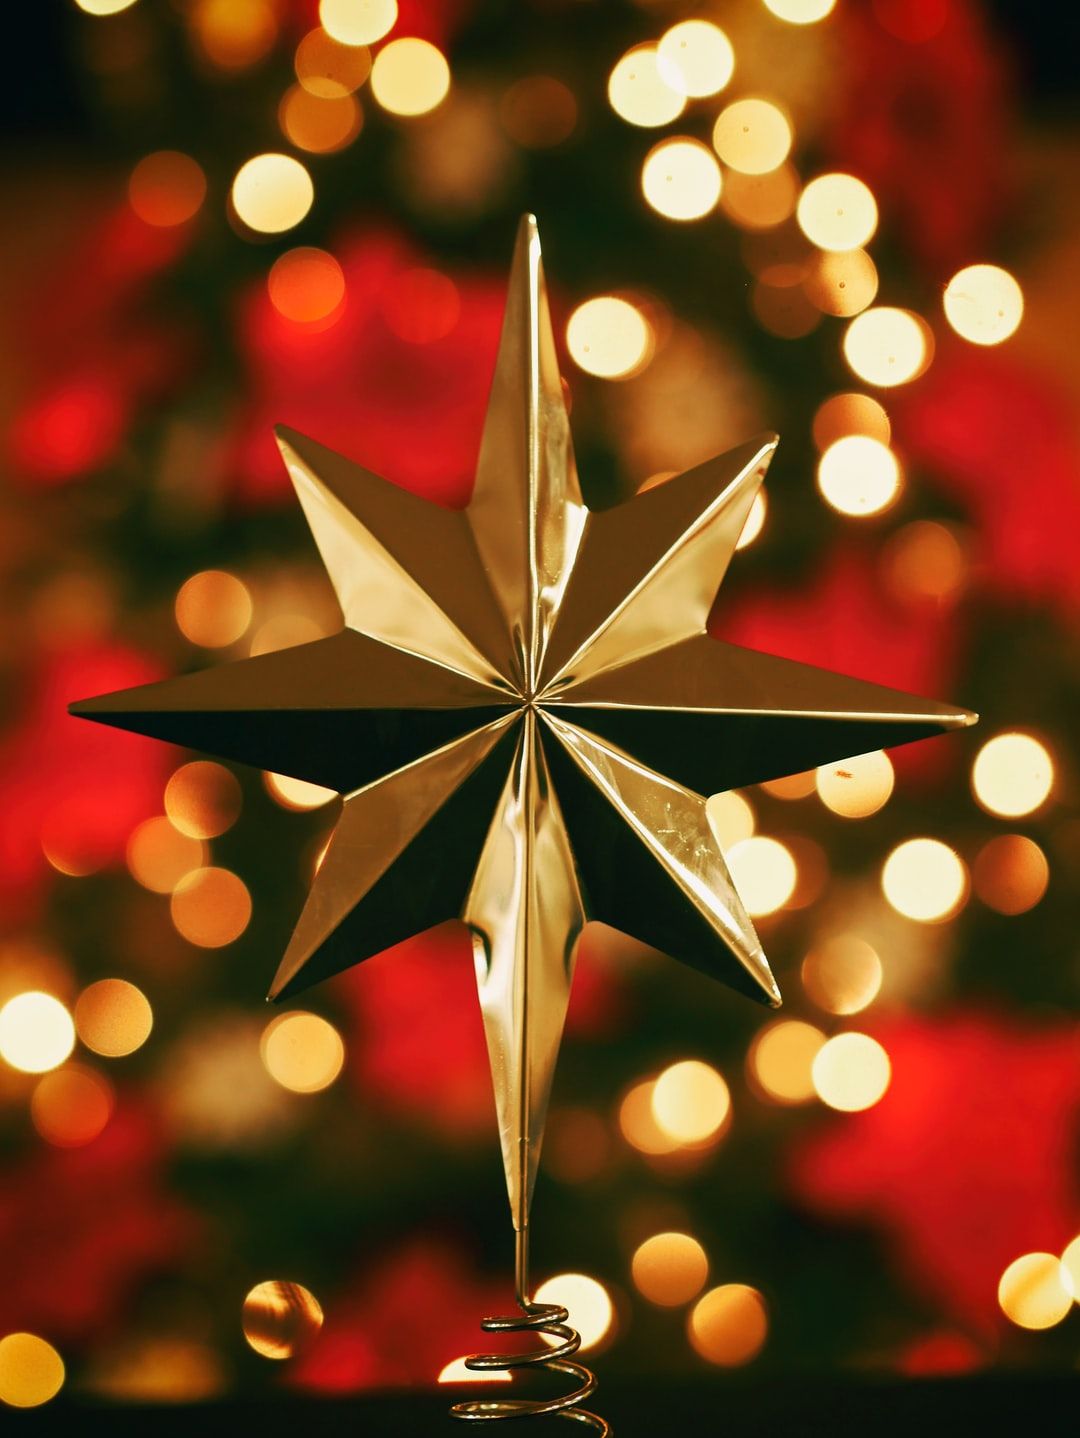 Christmas Star Picture. Download Free Image